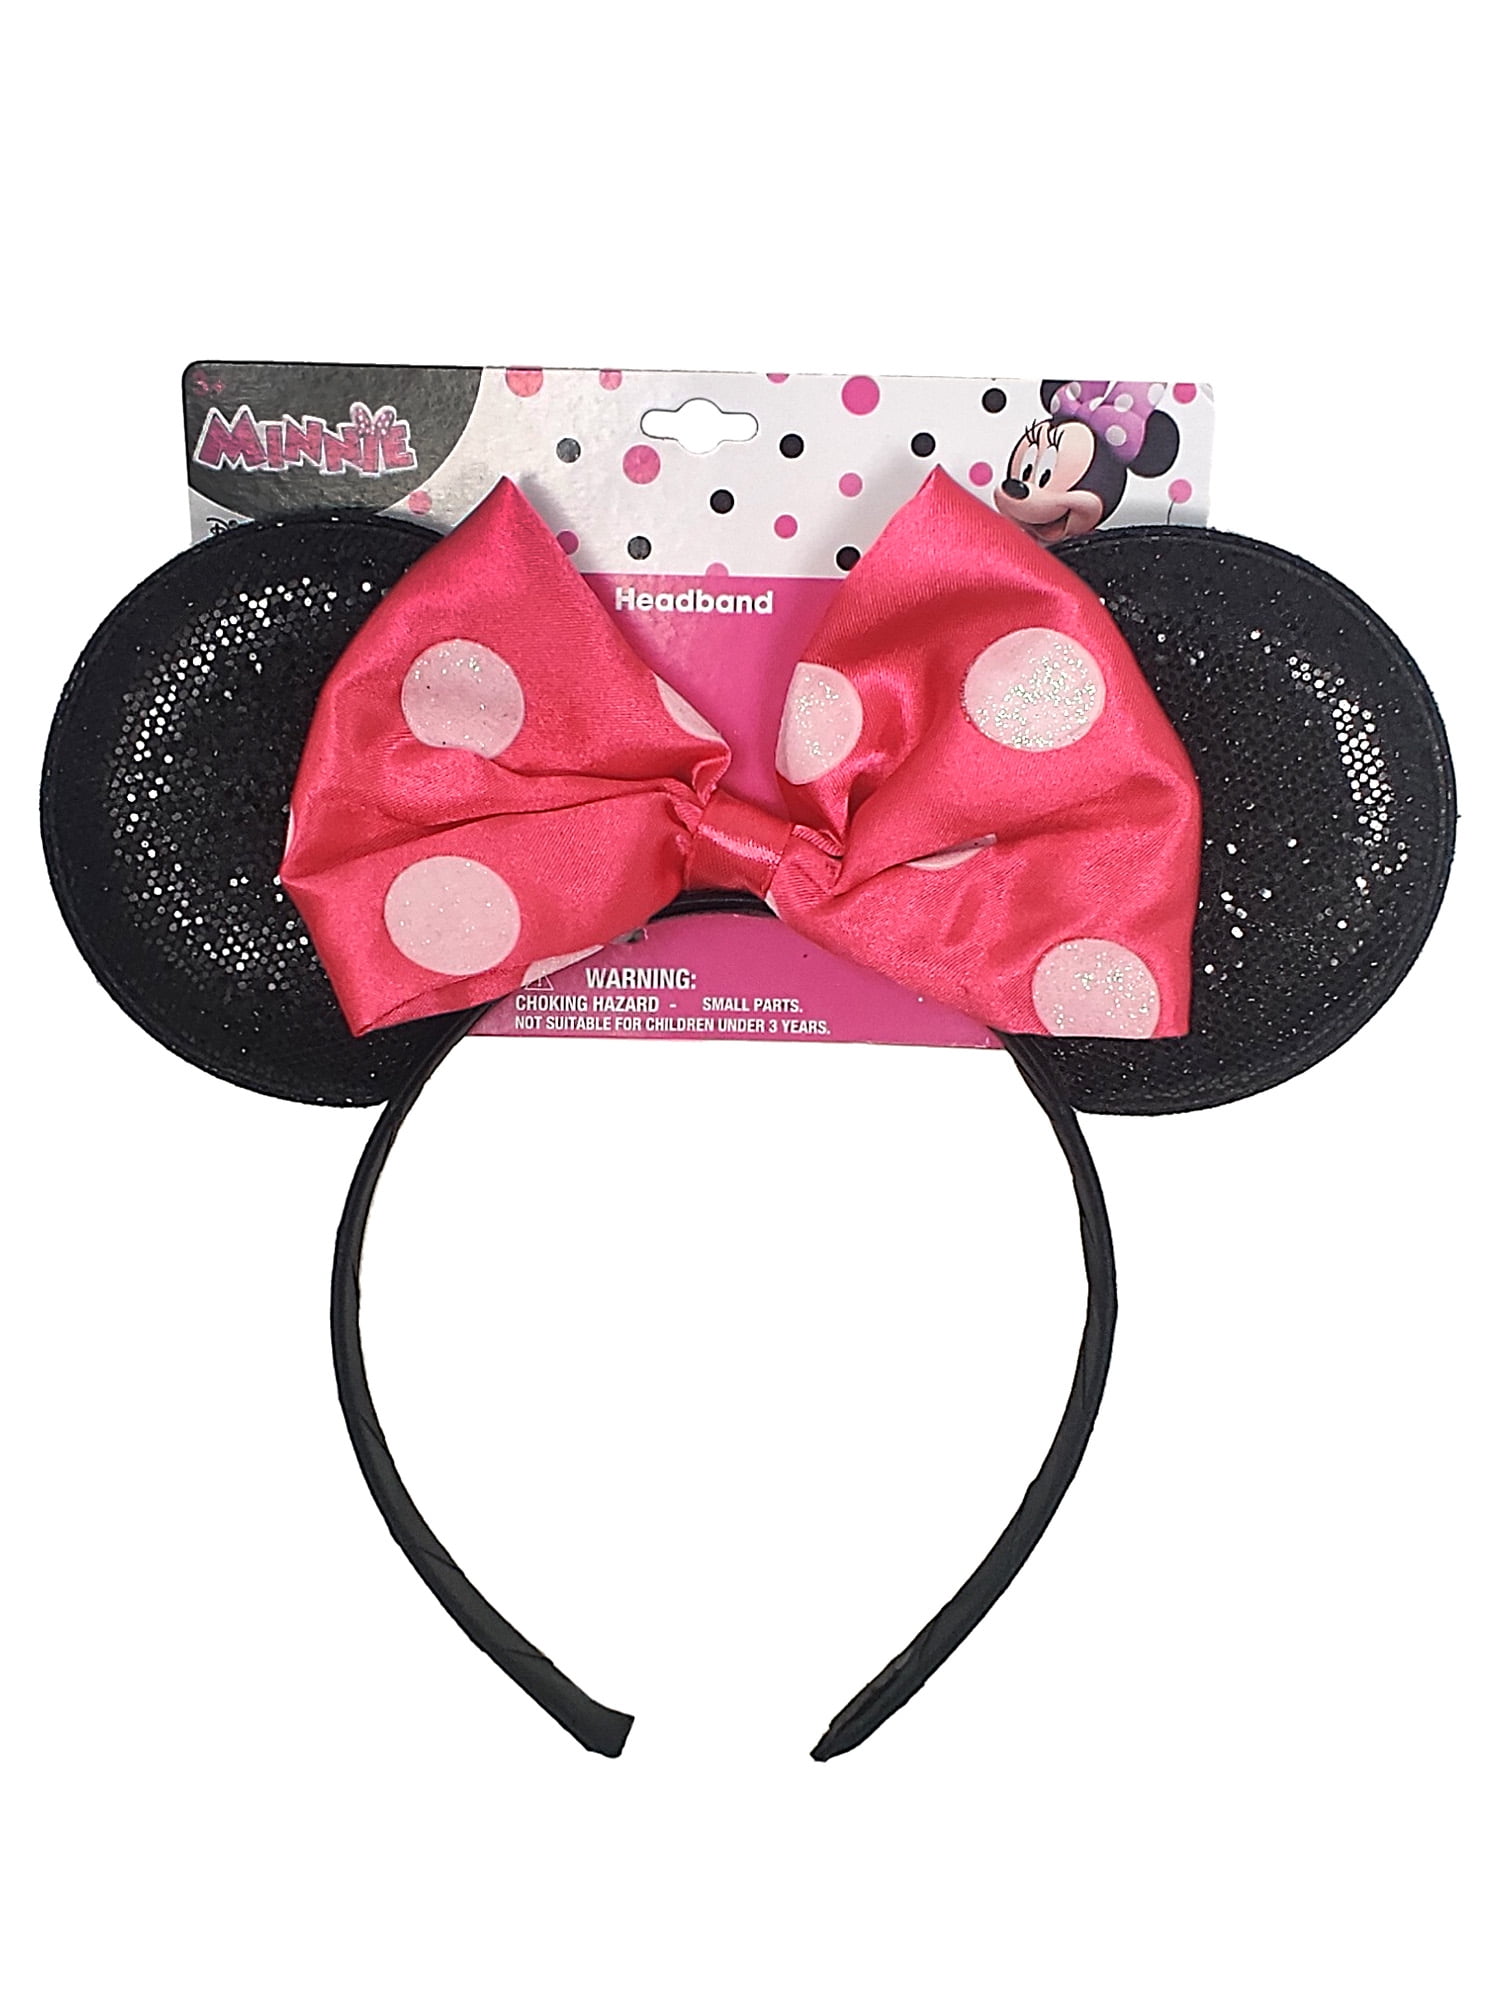 Minnie Mouse Ears Headband and Polka-Dotted Bow Licensed Costume Accessory NEW 